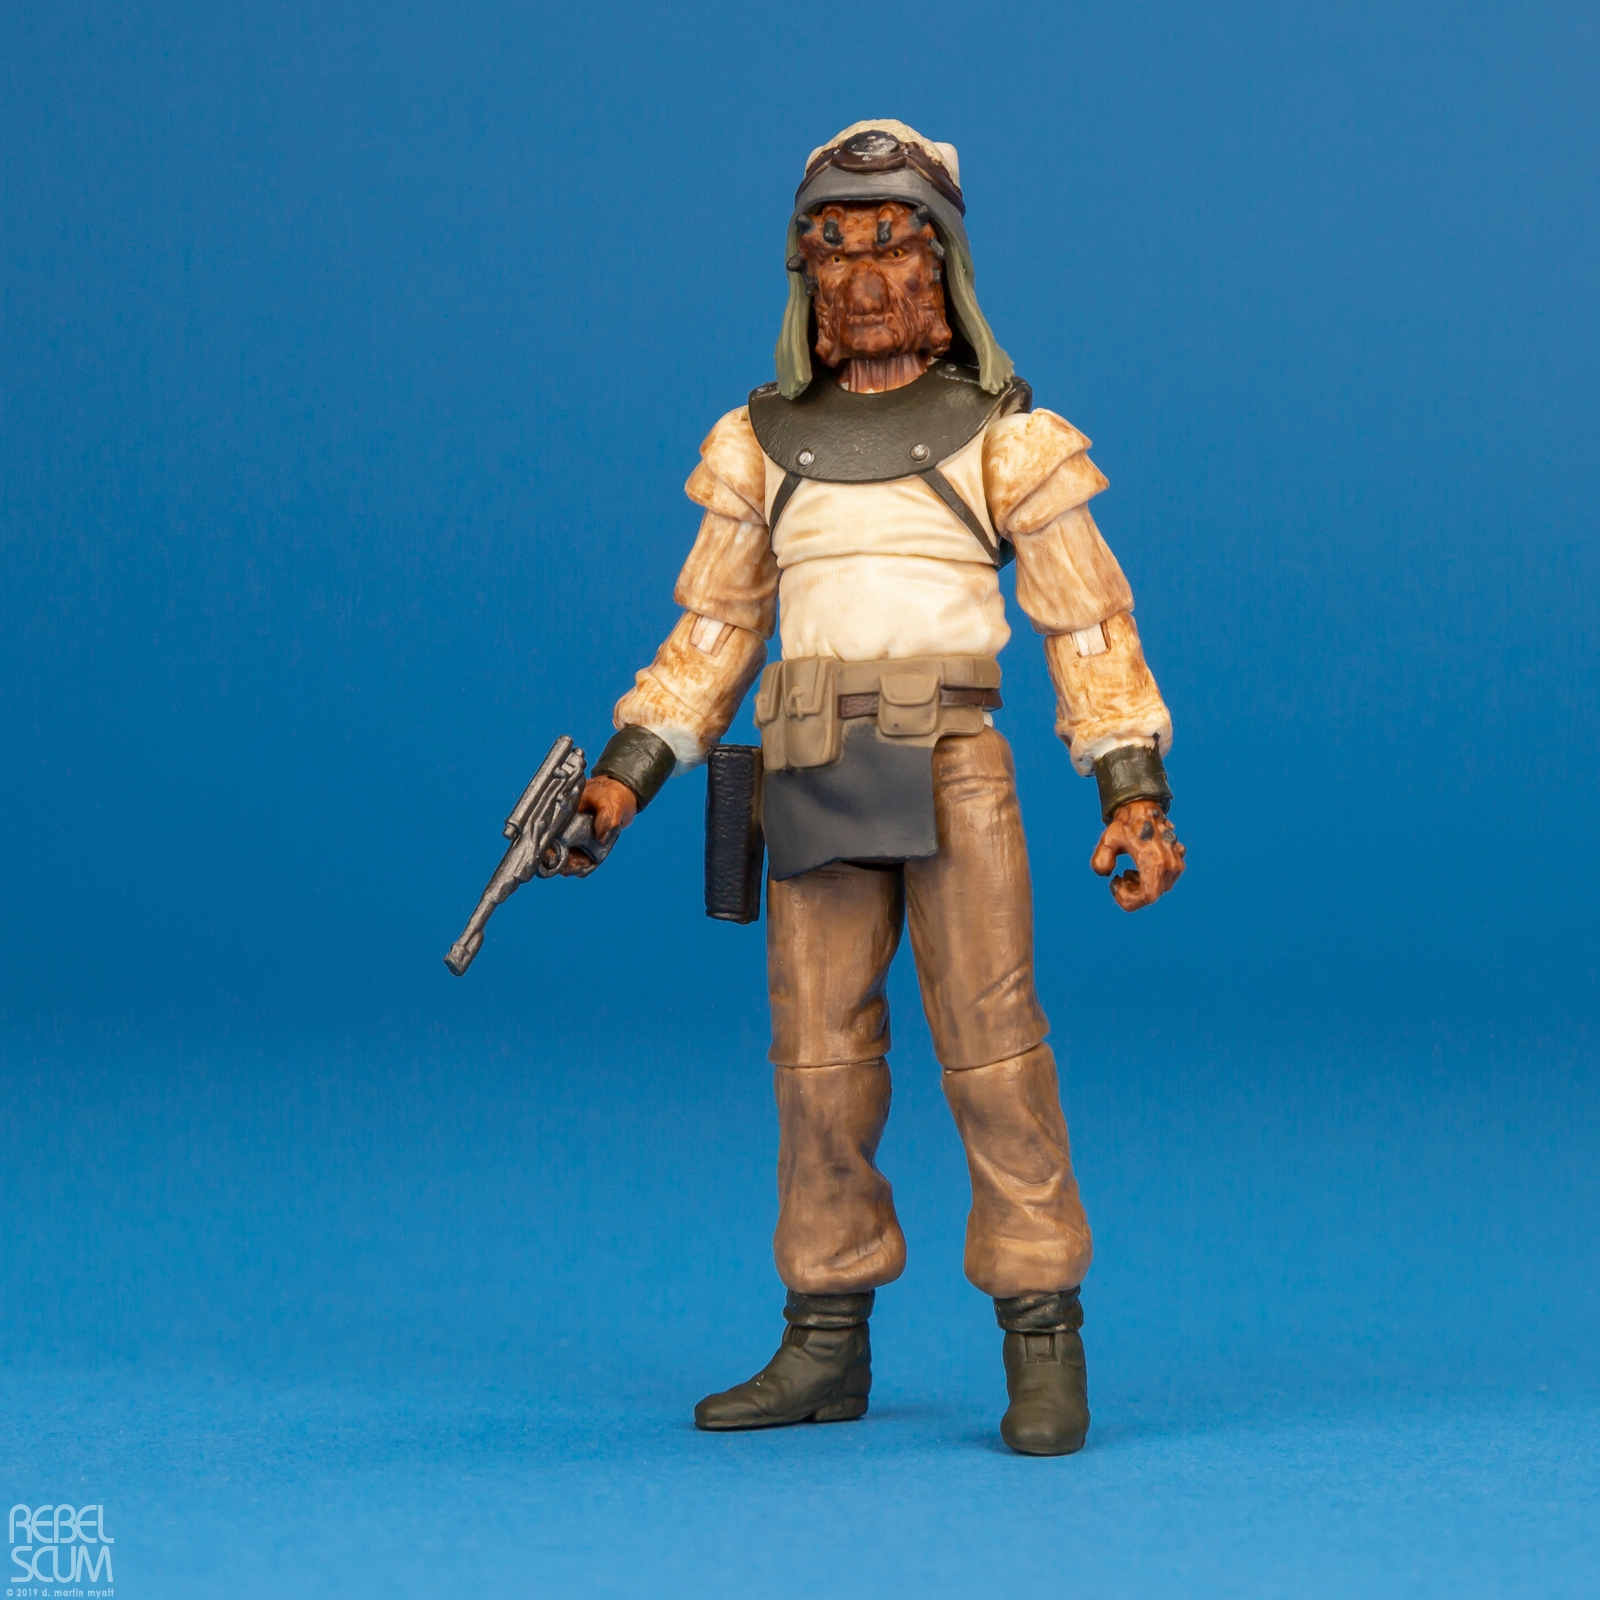 Special-3-Action-Figures-Set-The-Vintage-Collection-010.jpg